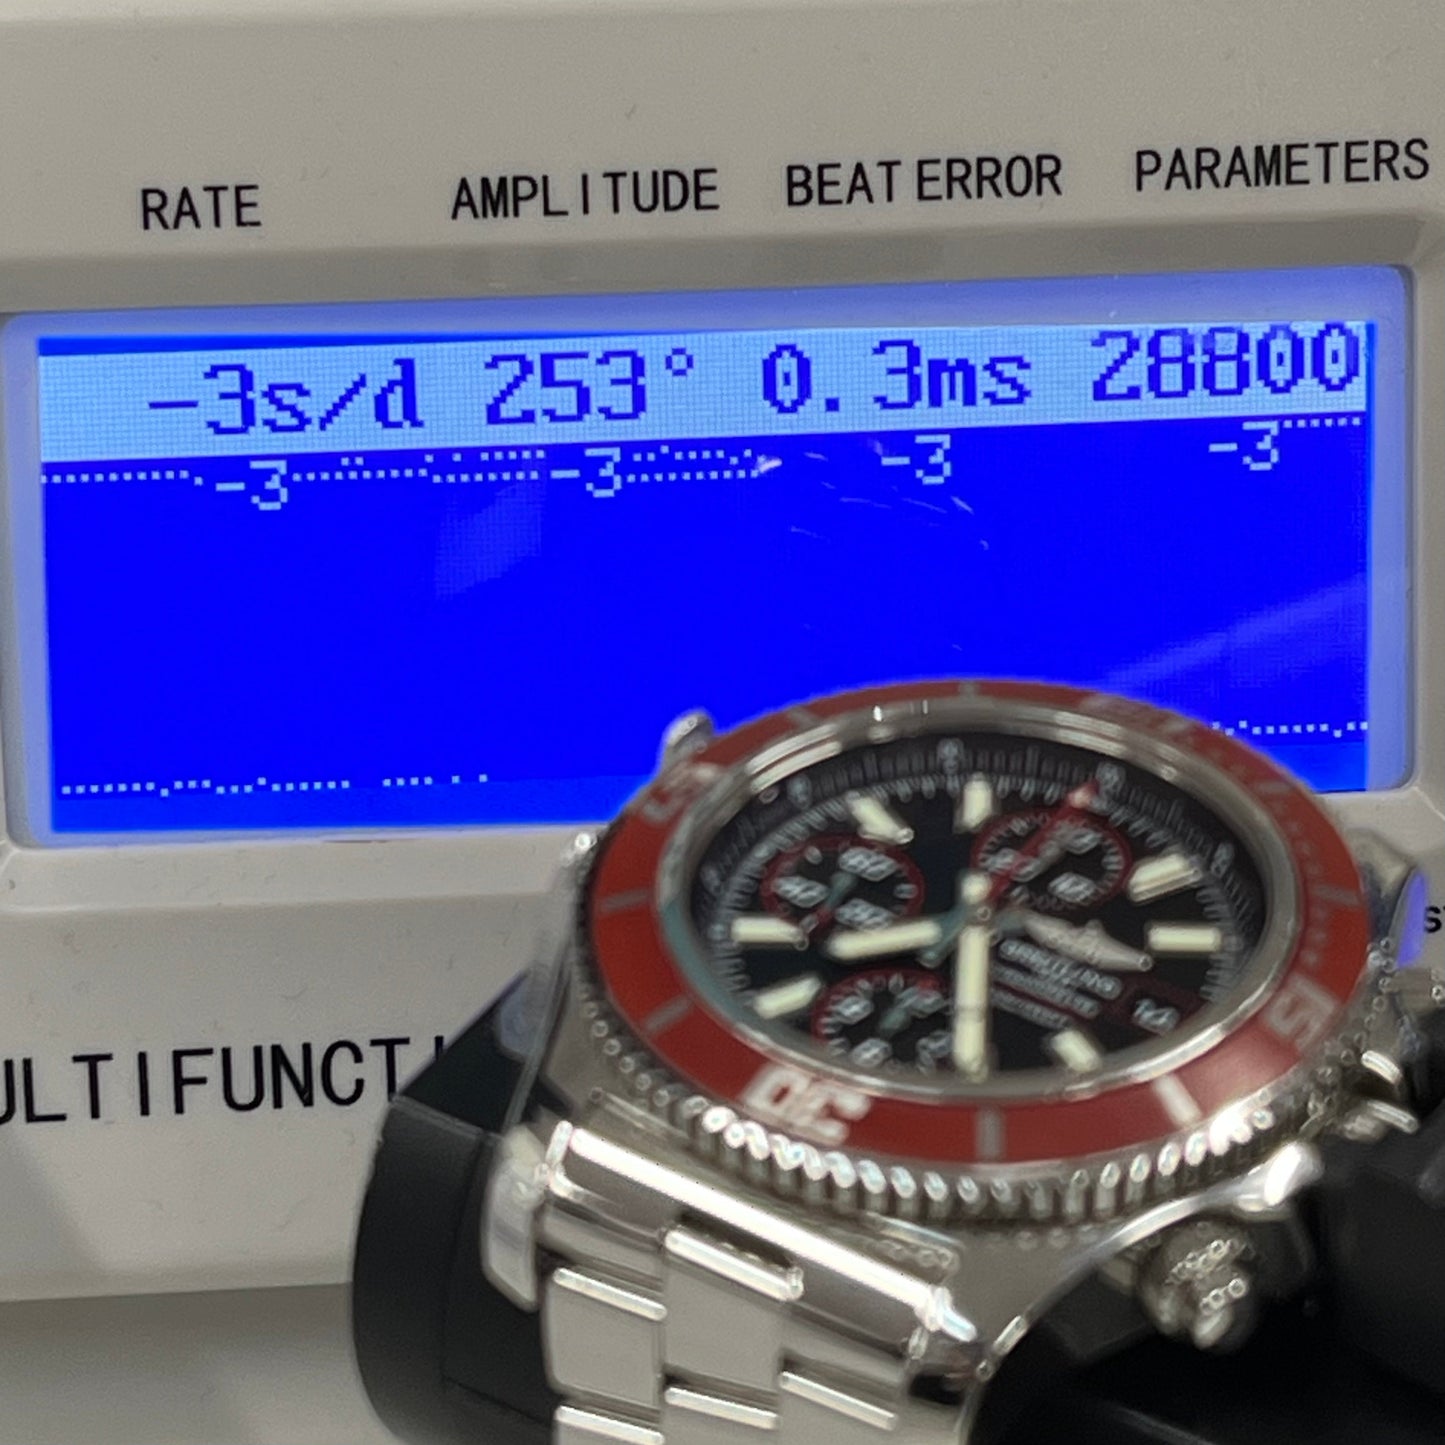 A109R81PRS　Super Ocean Chronograph Limited to 2000 pcs worldwide　2BRT01-00207